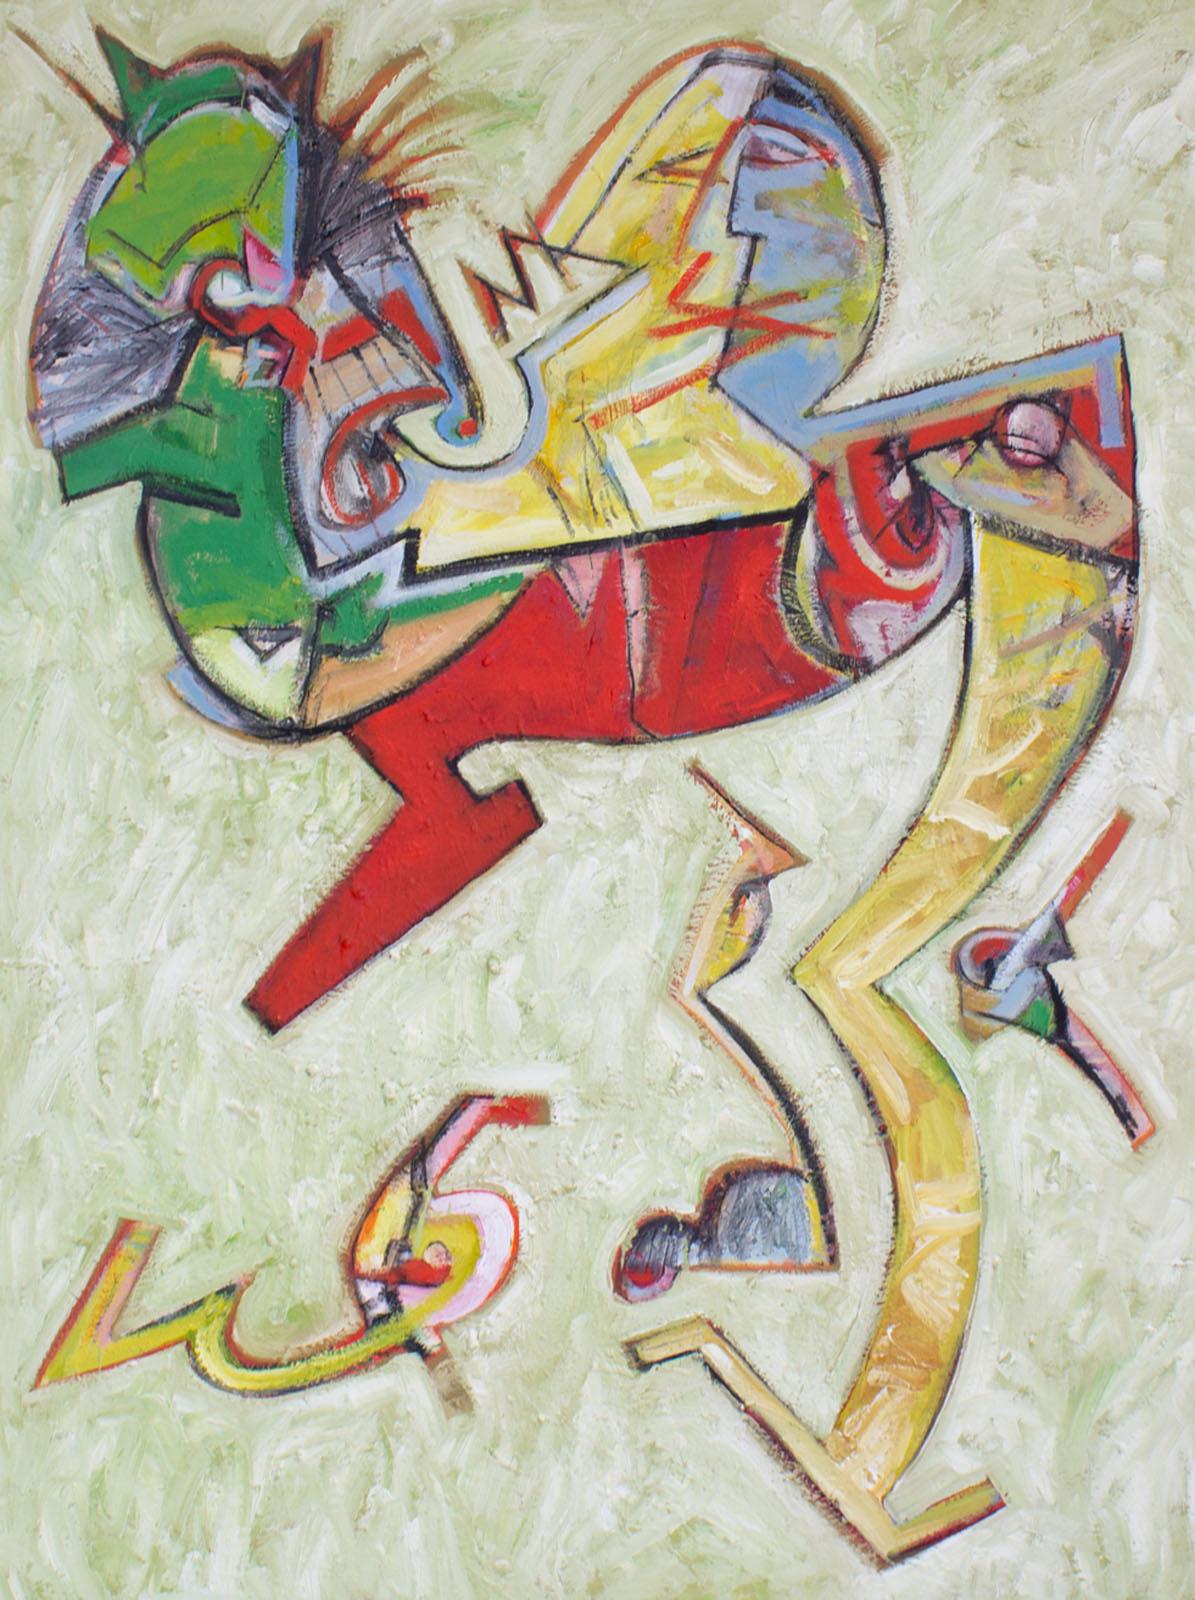 An abstract acrylic on canvas painting of a cat by the American artist James L. Bruch (1942-2023). Green, red, tan, and purple color add texture and dimension to this depiction of a whimsical cat and accompanying objects against a greenish white